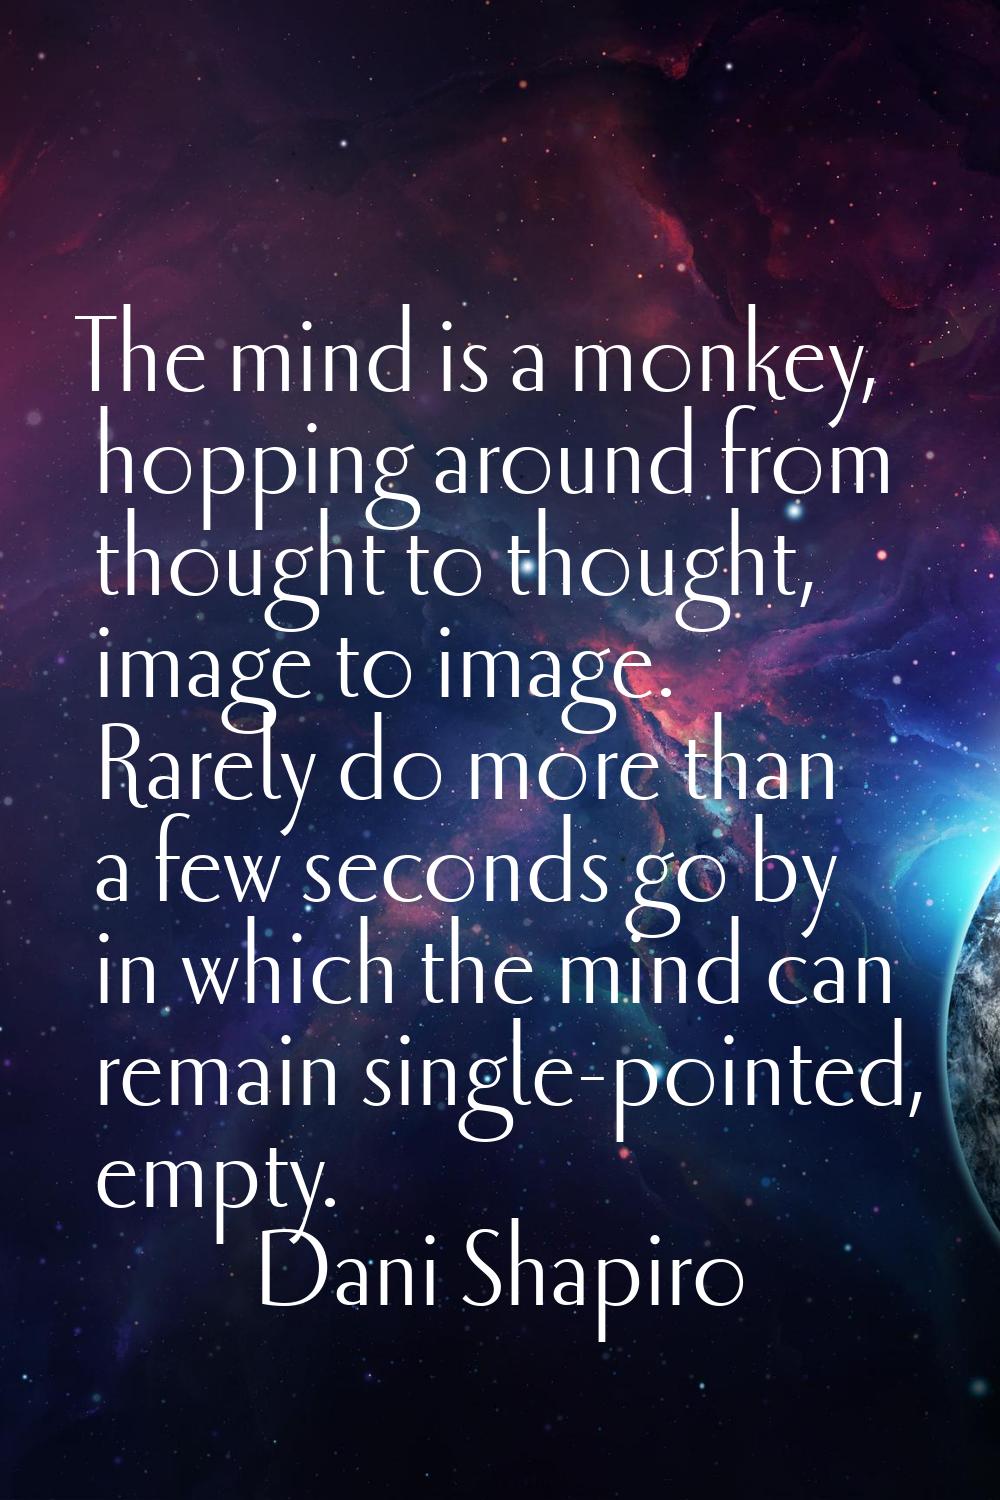 The mind is a monkey, hopping around from thought to thought, image to image. Rarely do more than a